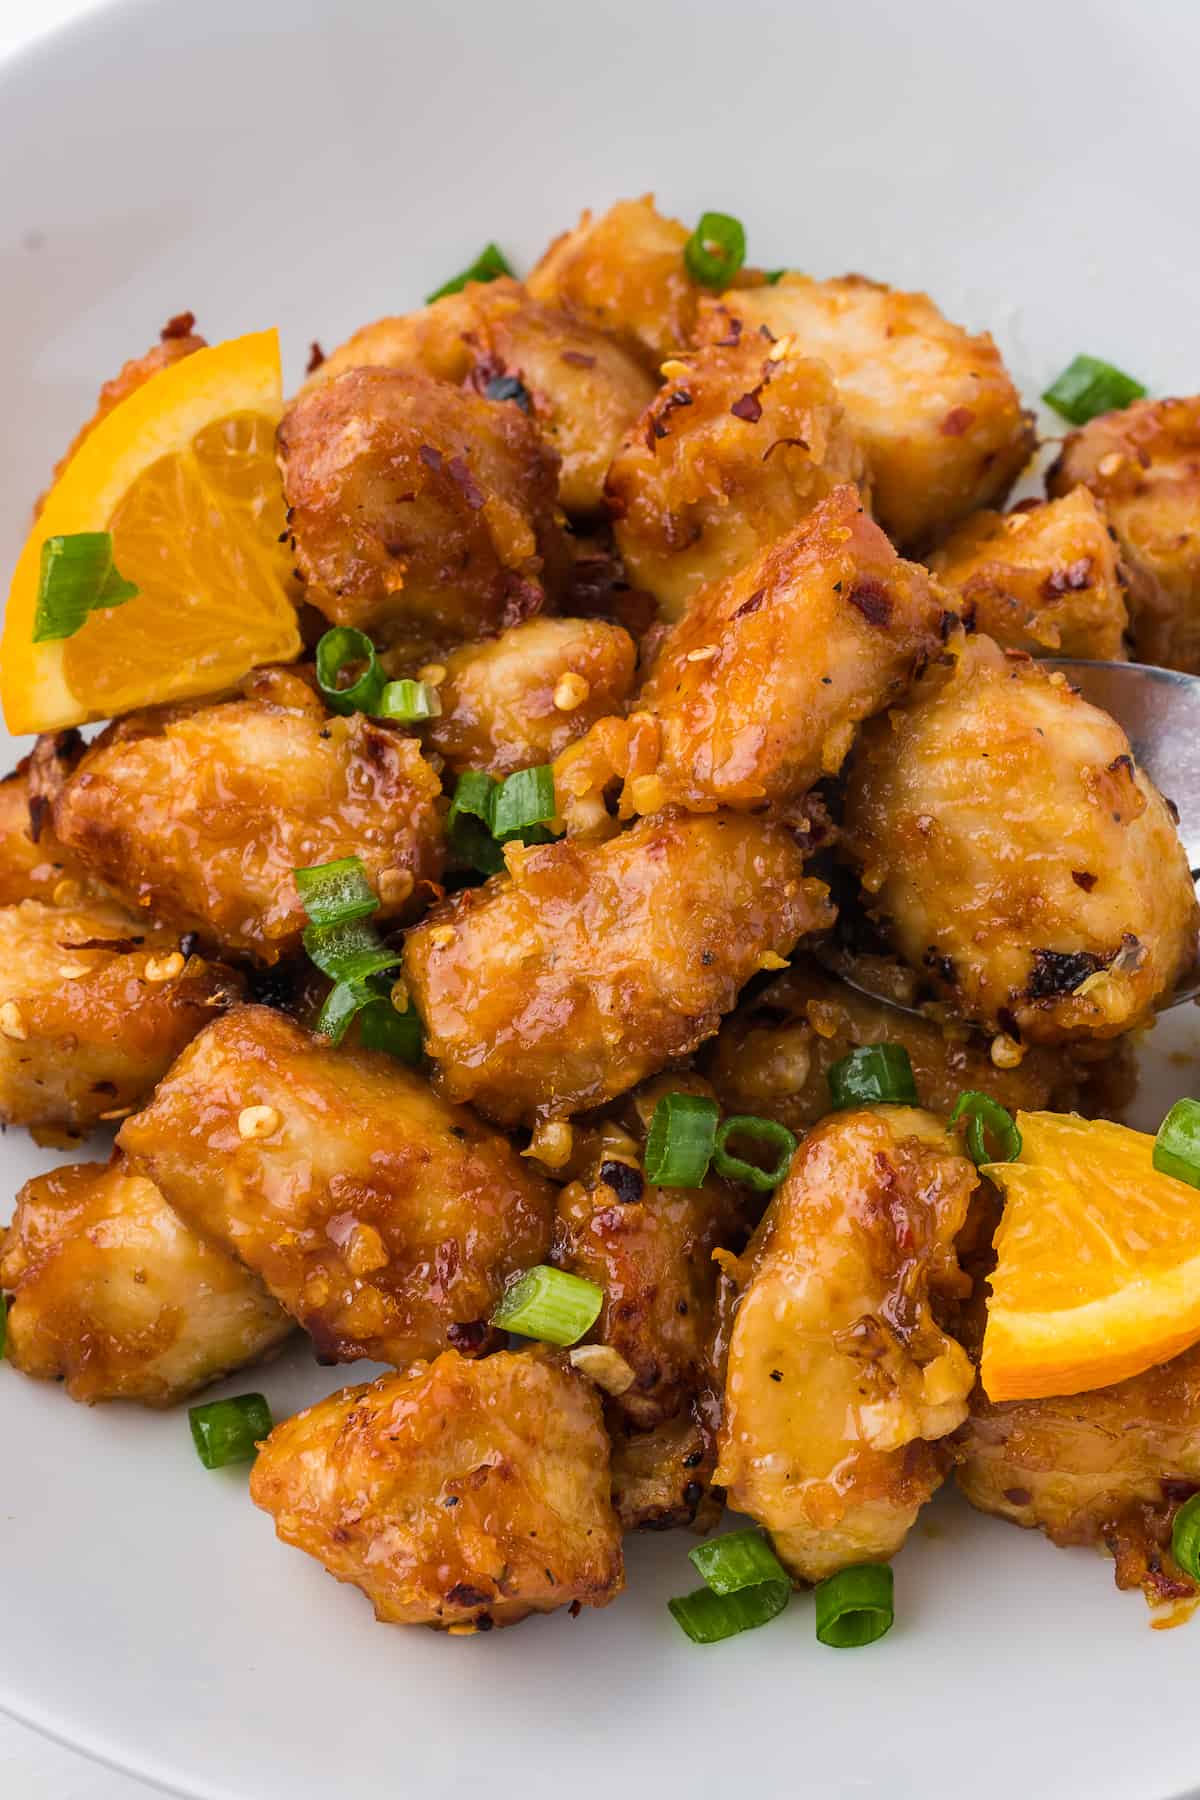 An Air Fryer plate with Orange Chicken and oranges on it.